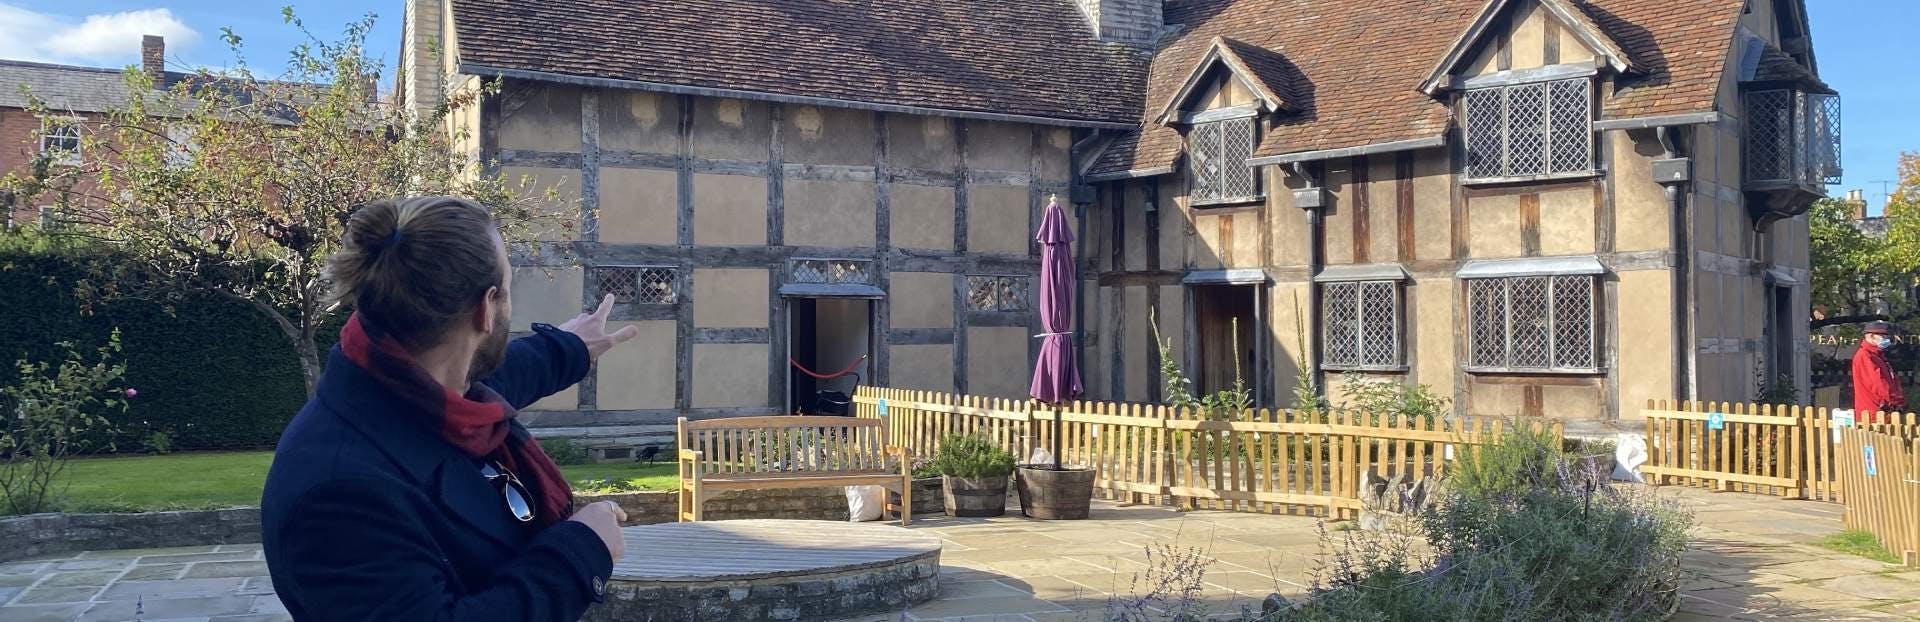 Self guided audio tour of Shakespeares birthplace in Stratford upon Avon Musement